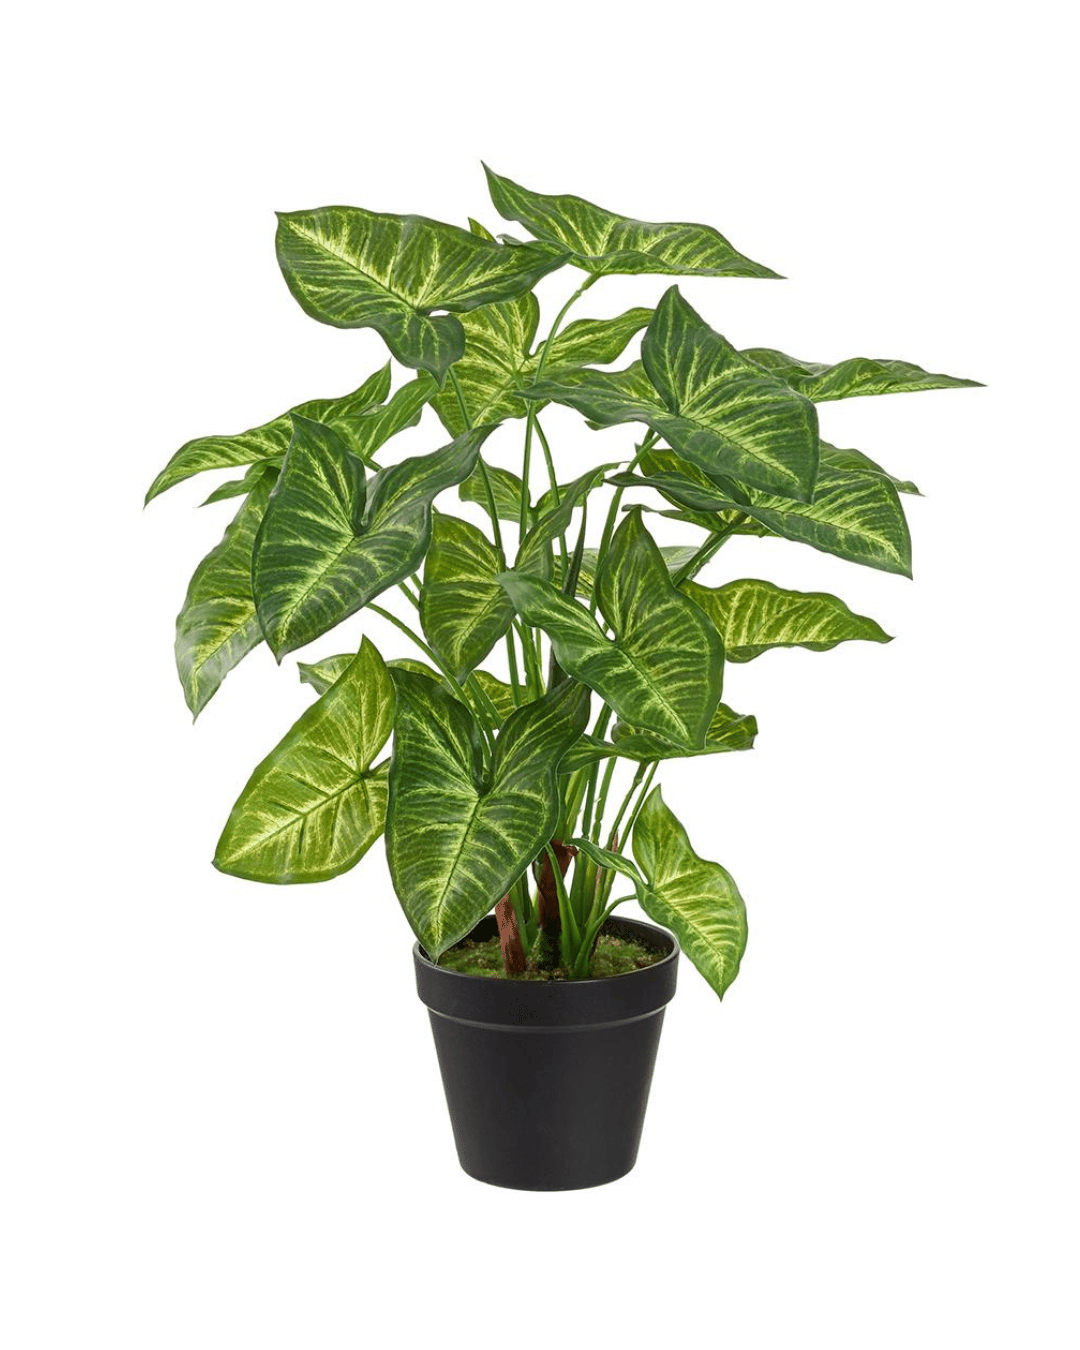 A lush AllState Floral And Craft 18" Arrowhead plant (Syngonium podophyllum) with vibrant green and white leaves, growing in a black pot typical of a Scottsdale Arizona bungalow, isolated on a white background.